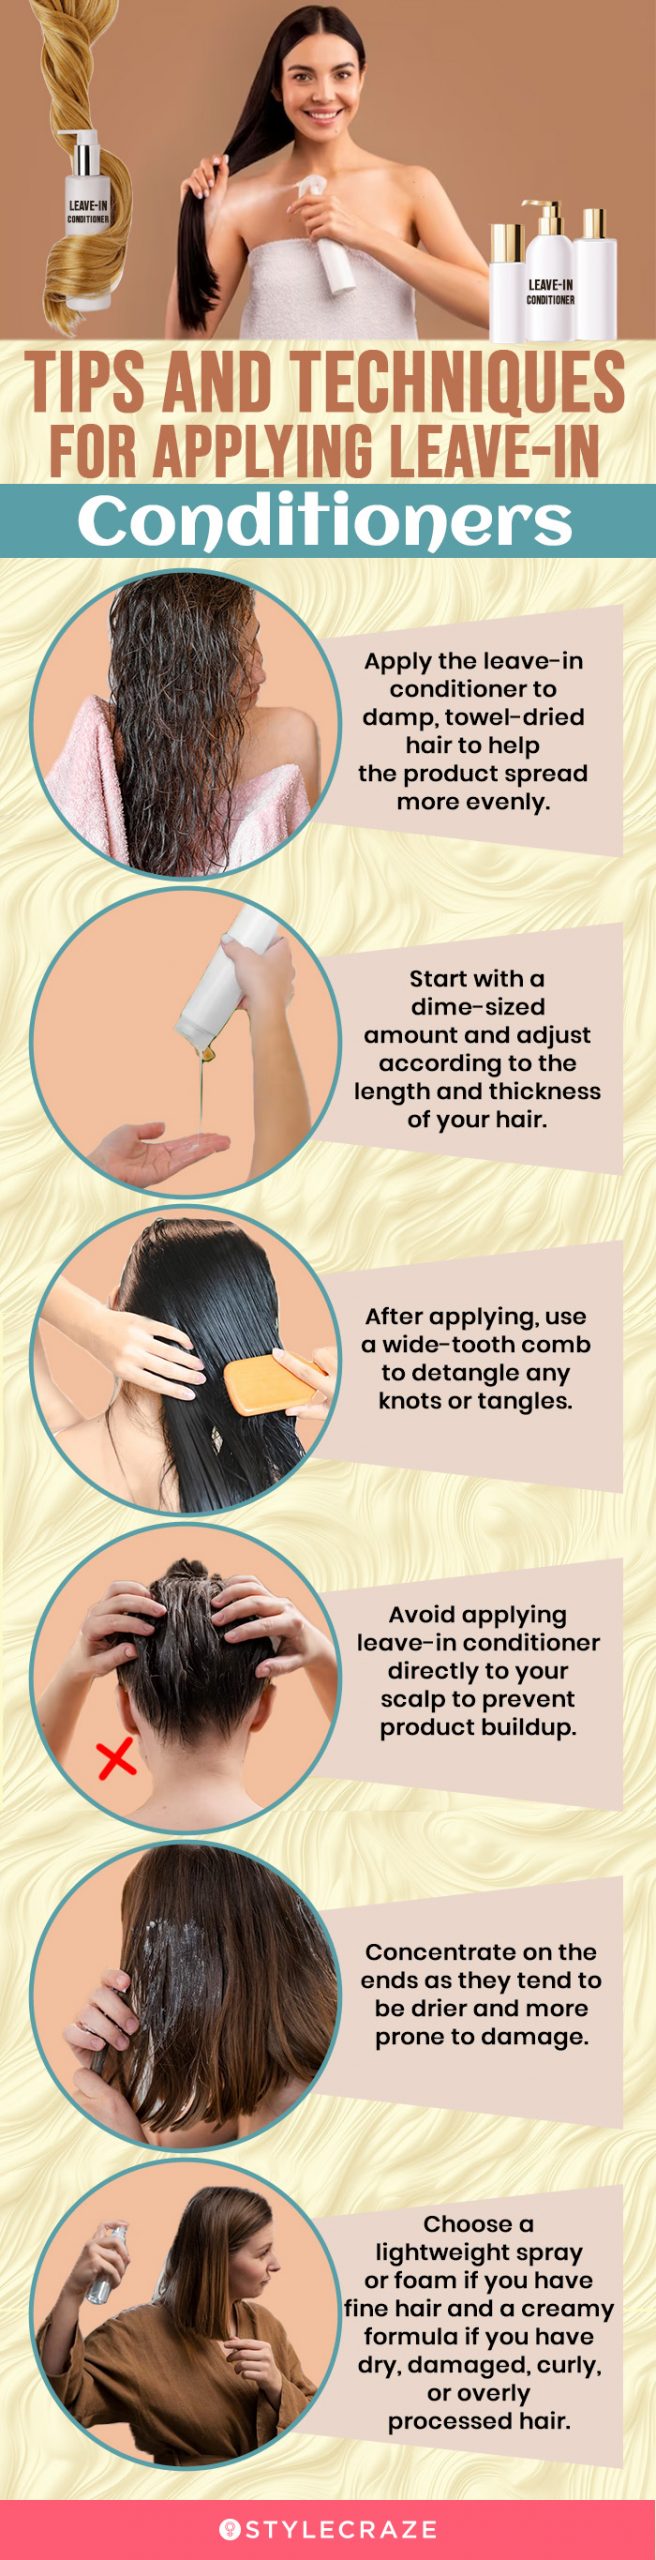 Tips And Techniques For Applying Leave-In Conditioners(infographic)